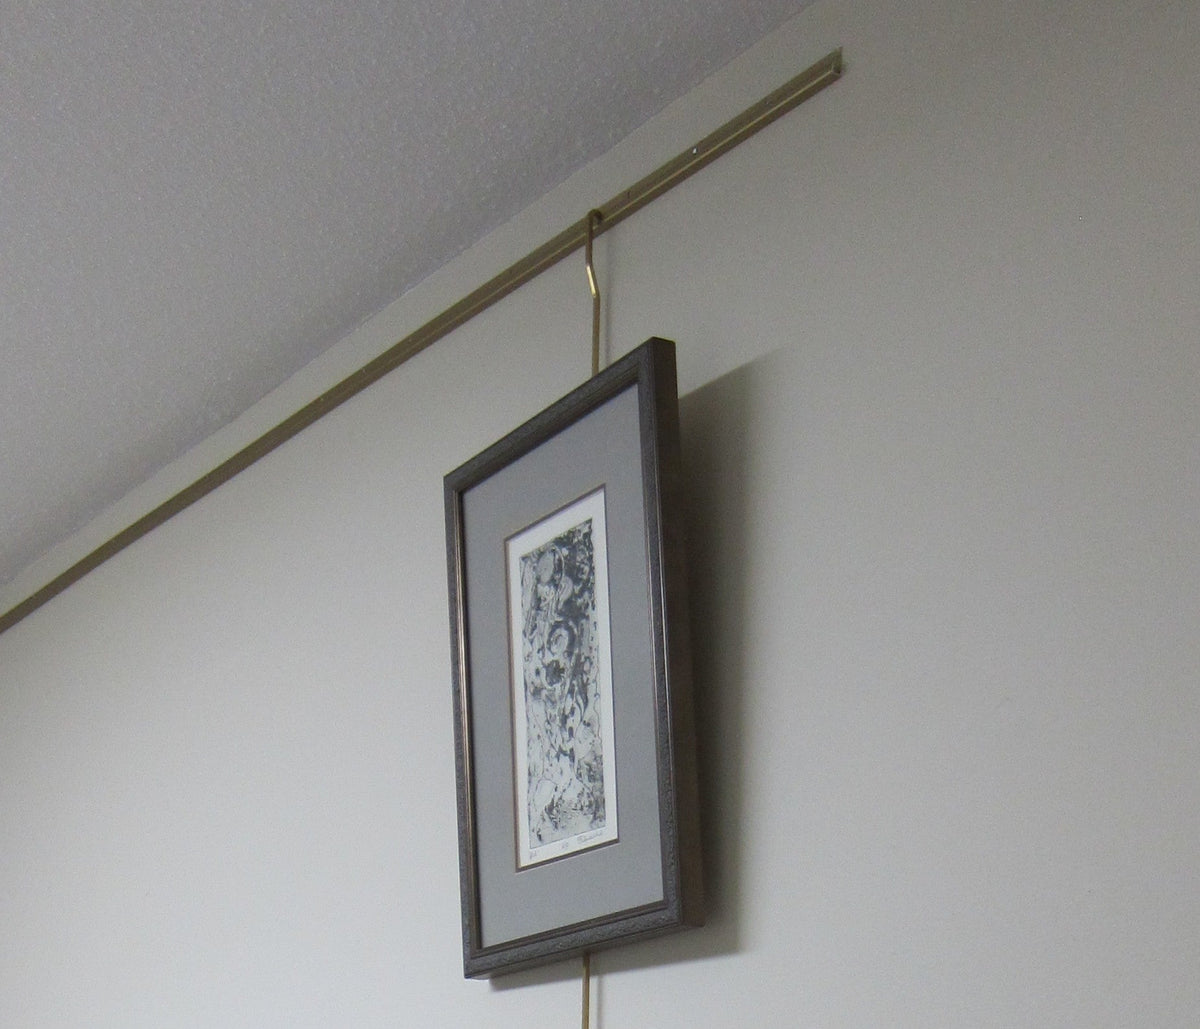 Gallery Wall Moulding 6 Foot J Channel - BGS-RAIL - Picture Hang Solutions